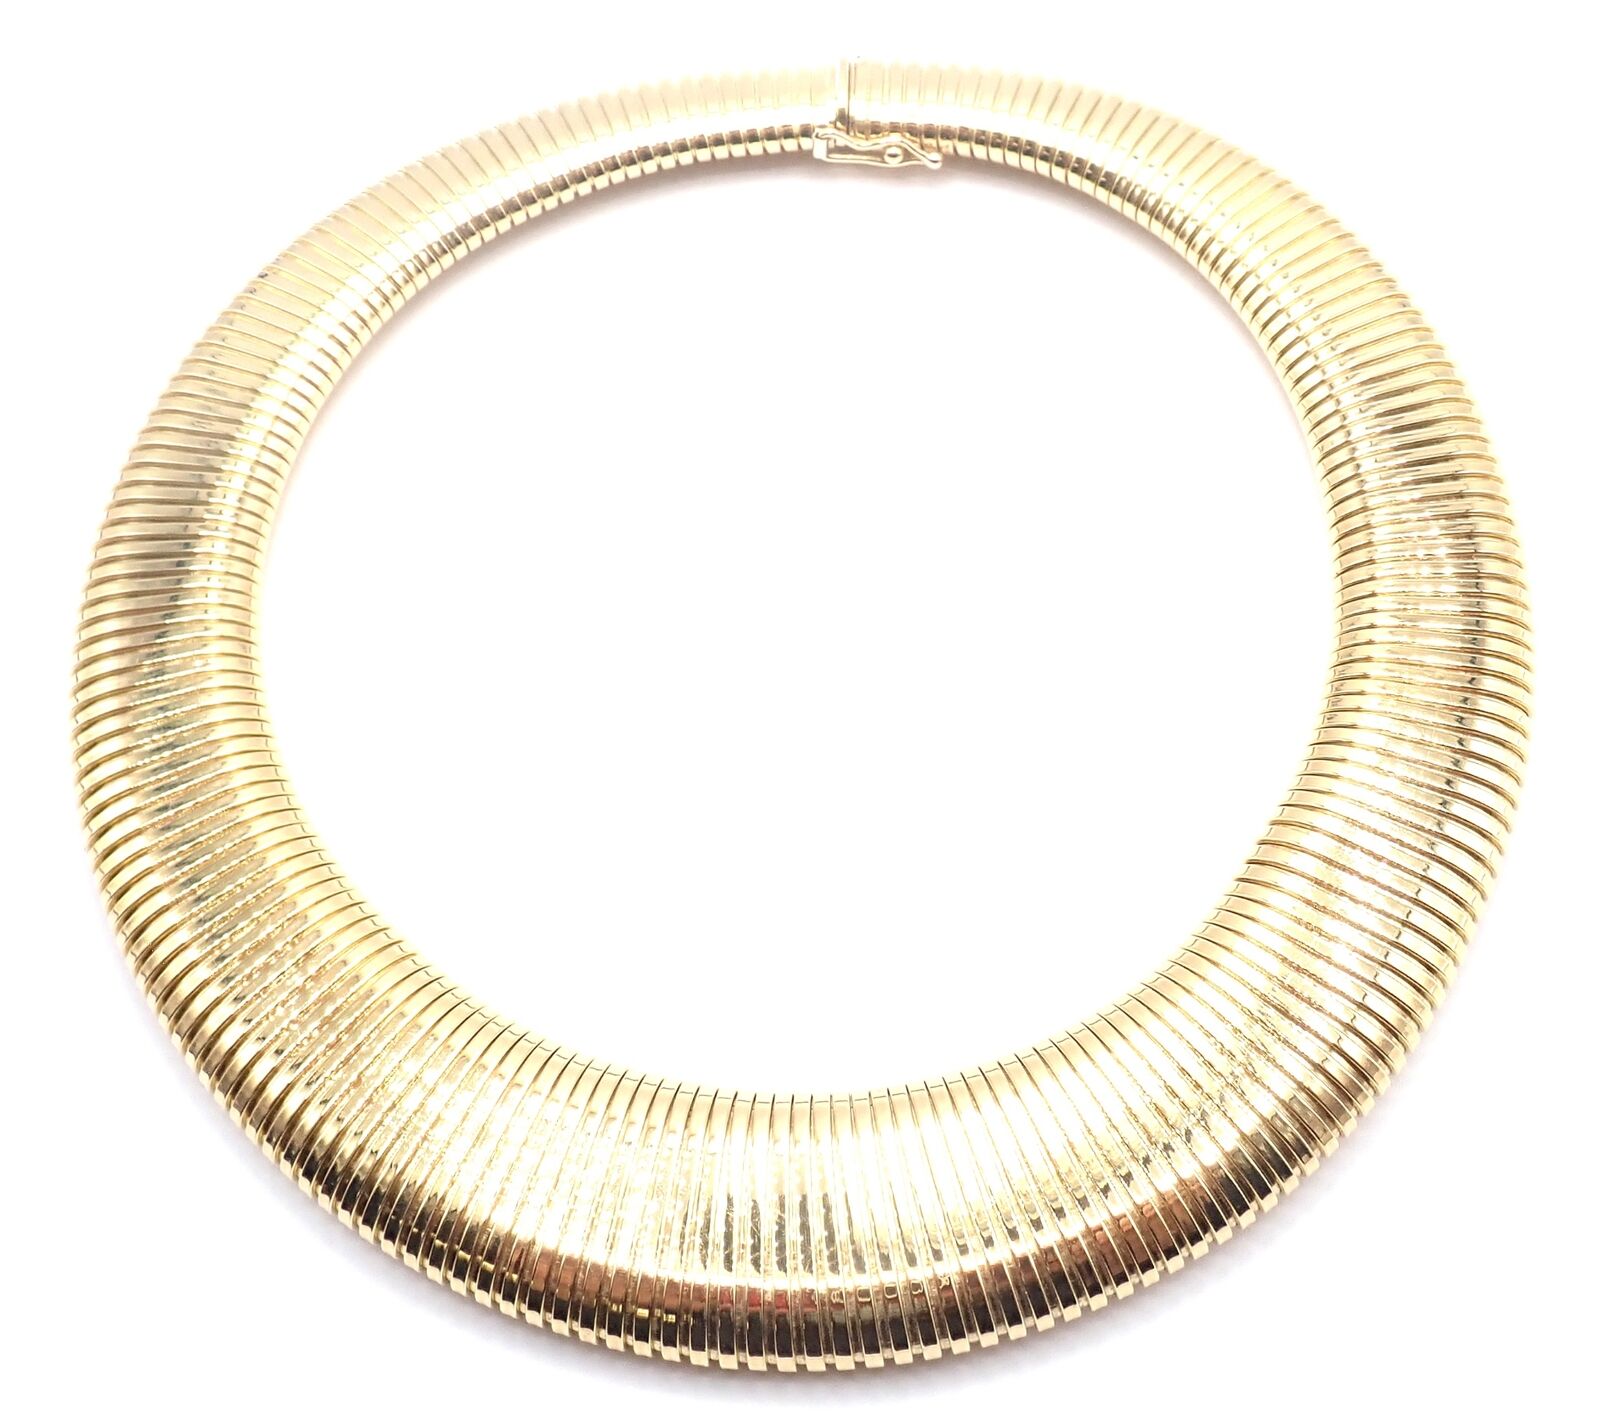 Authentic! Vintage Cartier Tubogas 18k Yellow Gold Wide Necklace | Fortrove